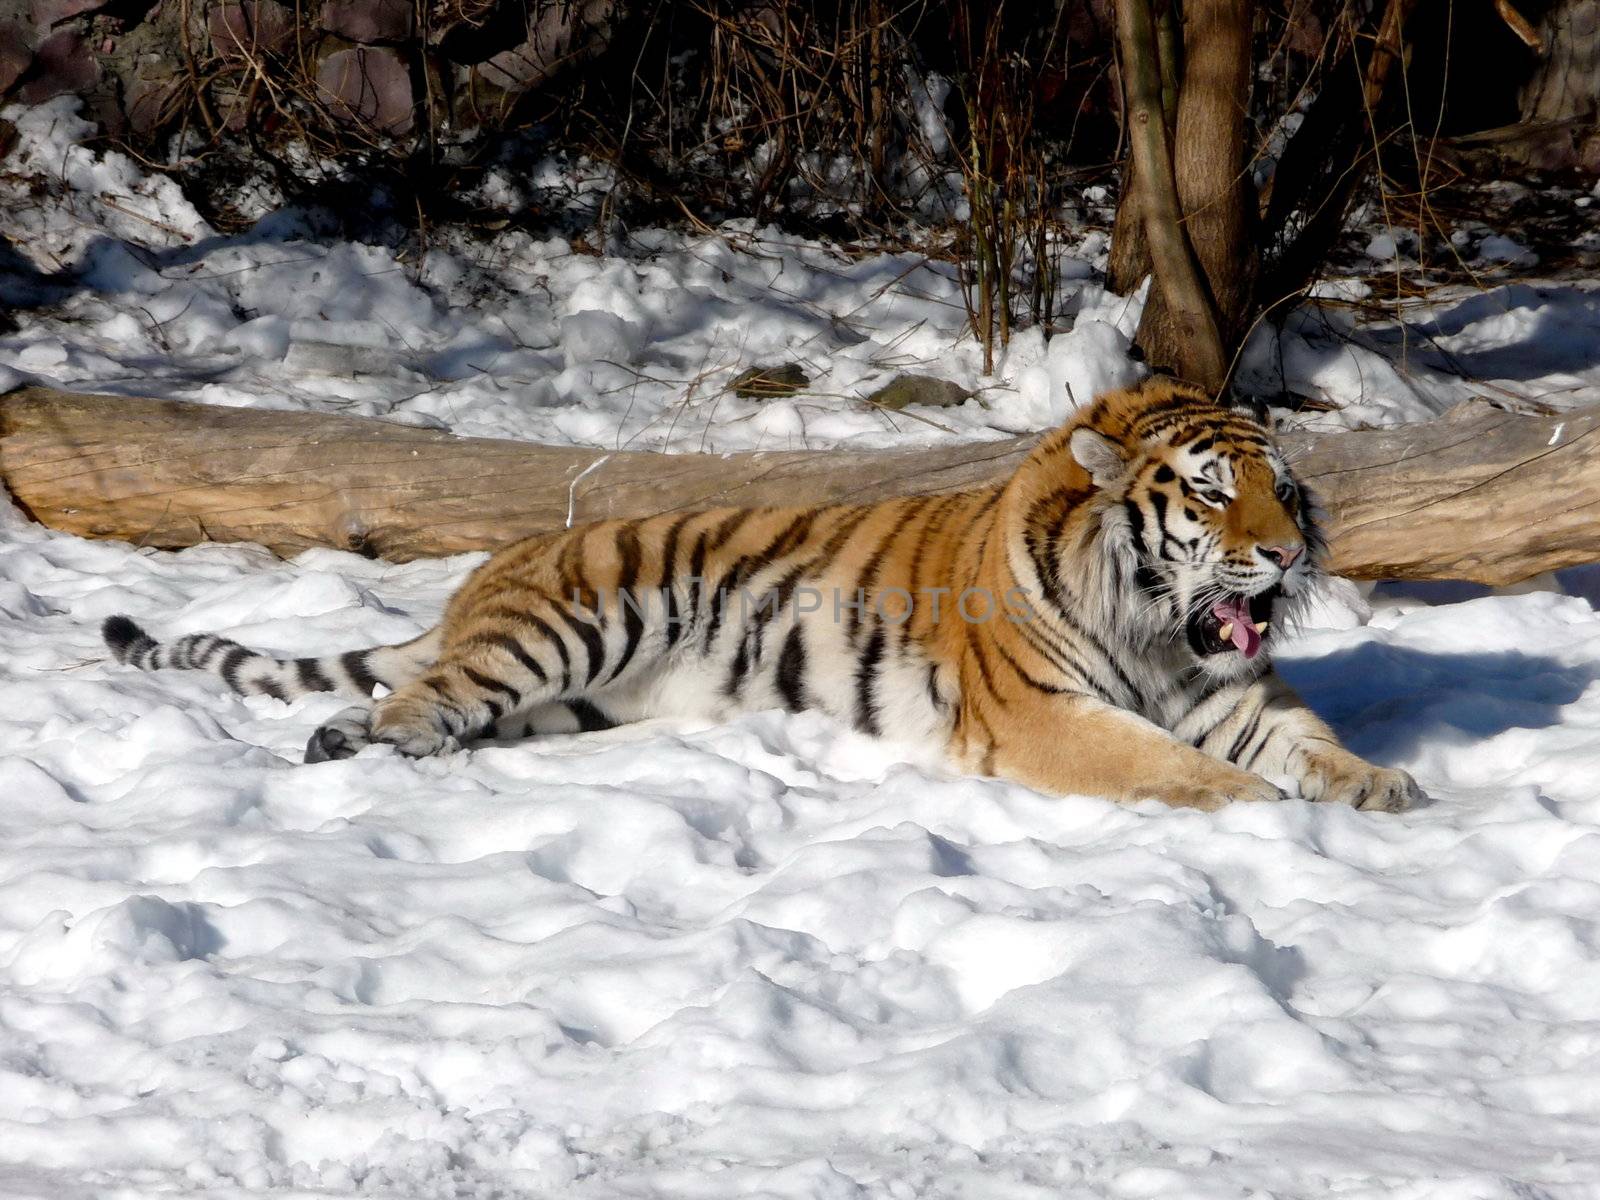 Tiger on snow by tomatto